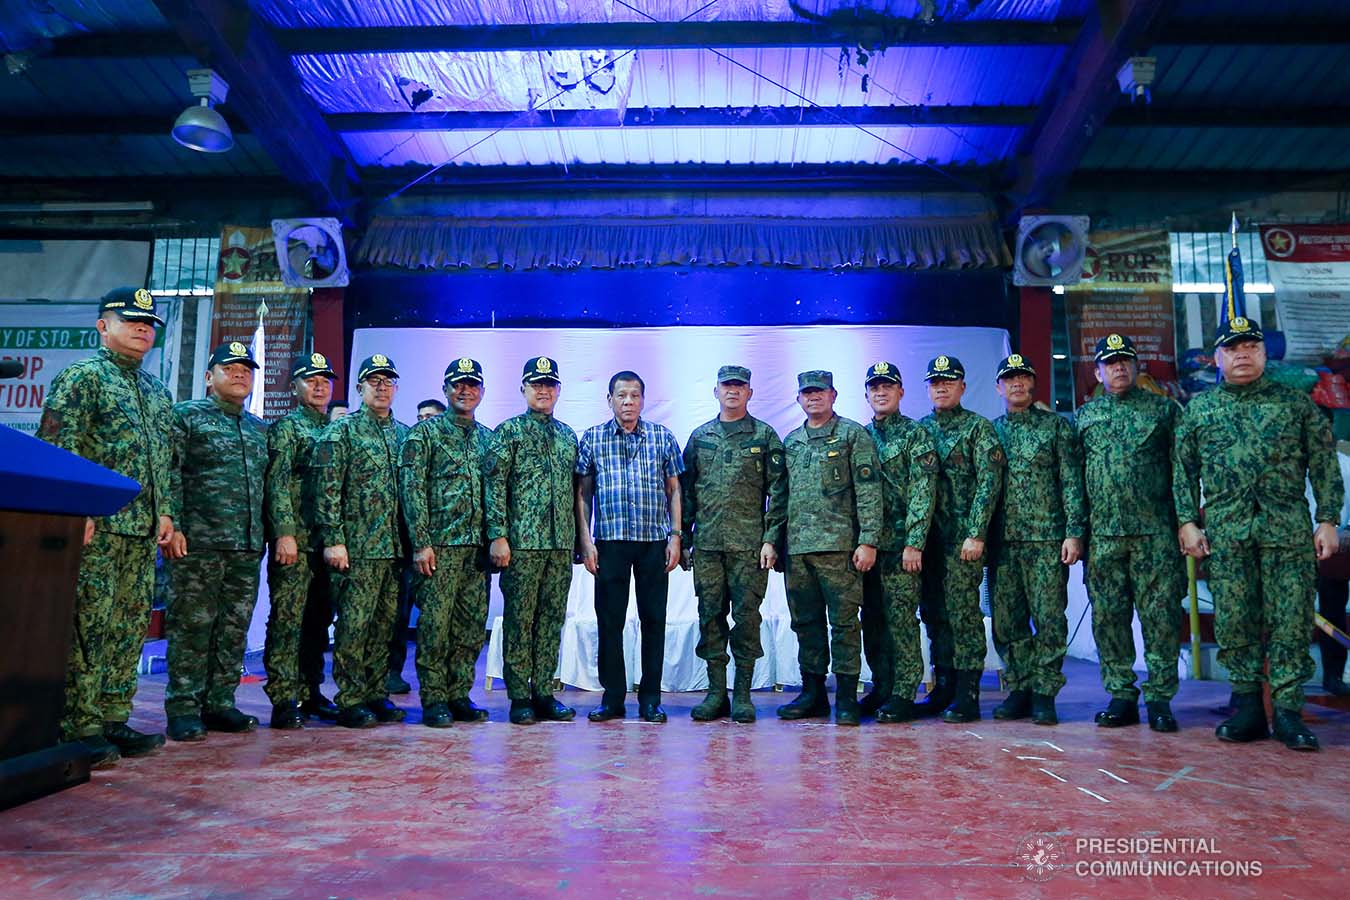 President Rodrigo Roa Duterte poses for posterity with newly appointed Philippine National Police (PNP) Chief Police Lieutenant General Archie Gamboa and other officials of the PNP during the oath-taking ceremony at the Polytechnic University of the Philippines-Sto. Tomas Campus in Sto. Tomas City, Batangas on January 20, 2020. VALERIE ESCALERA/PRESIDENTIAL PHOTO